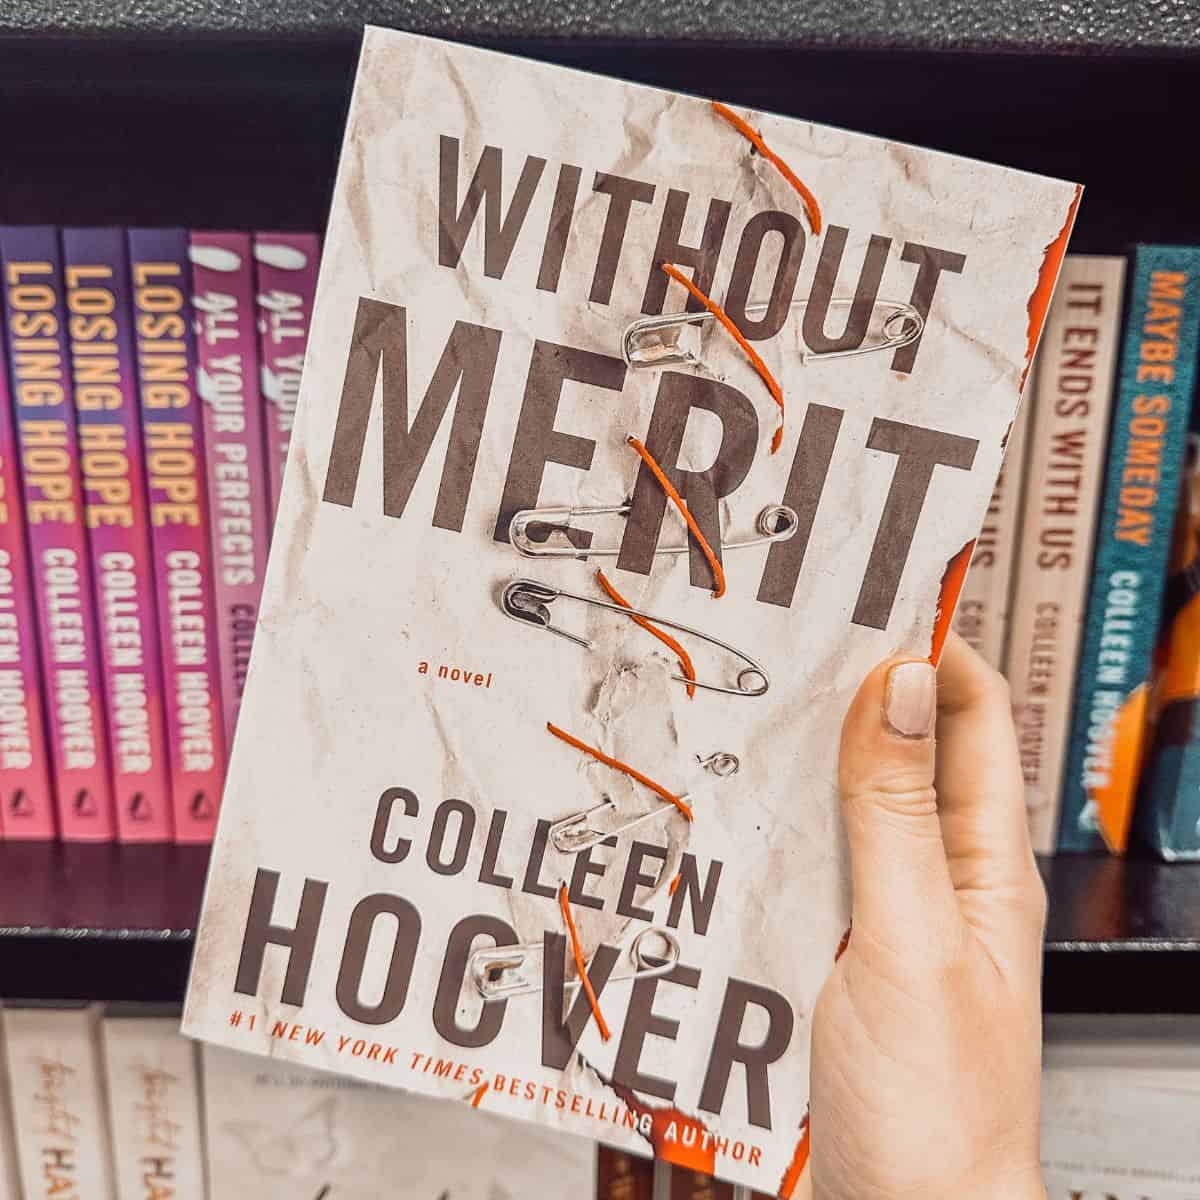 Full Without Merit Summary (Colleen Hoover’s Book)